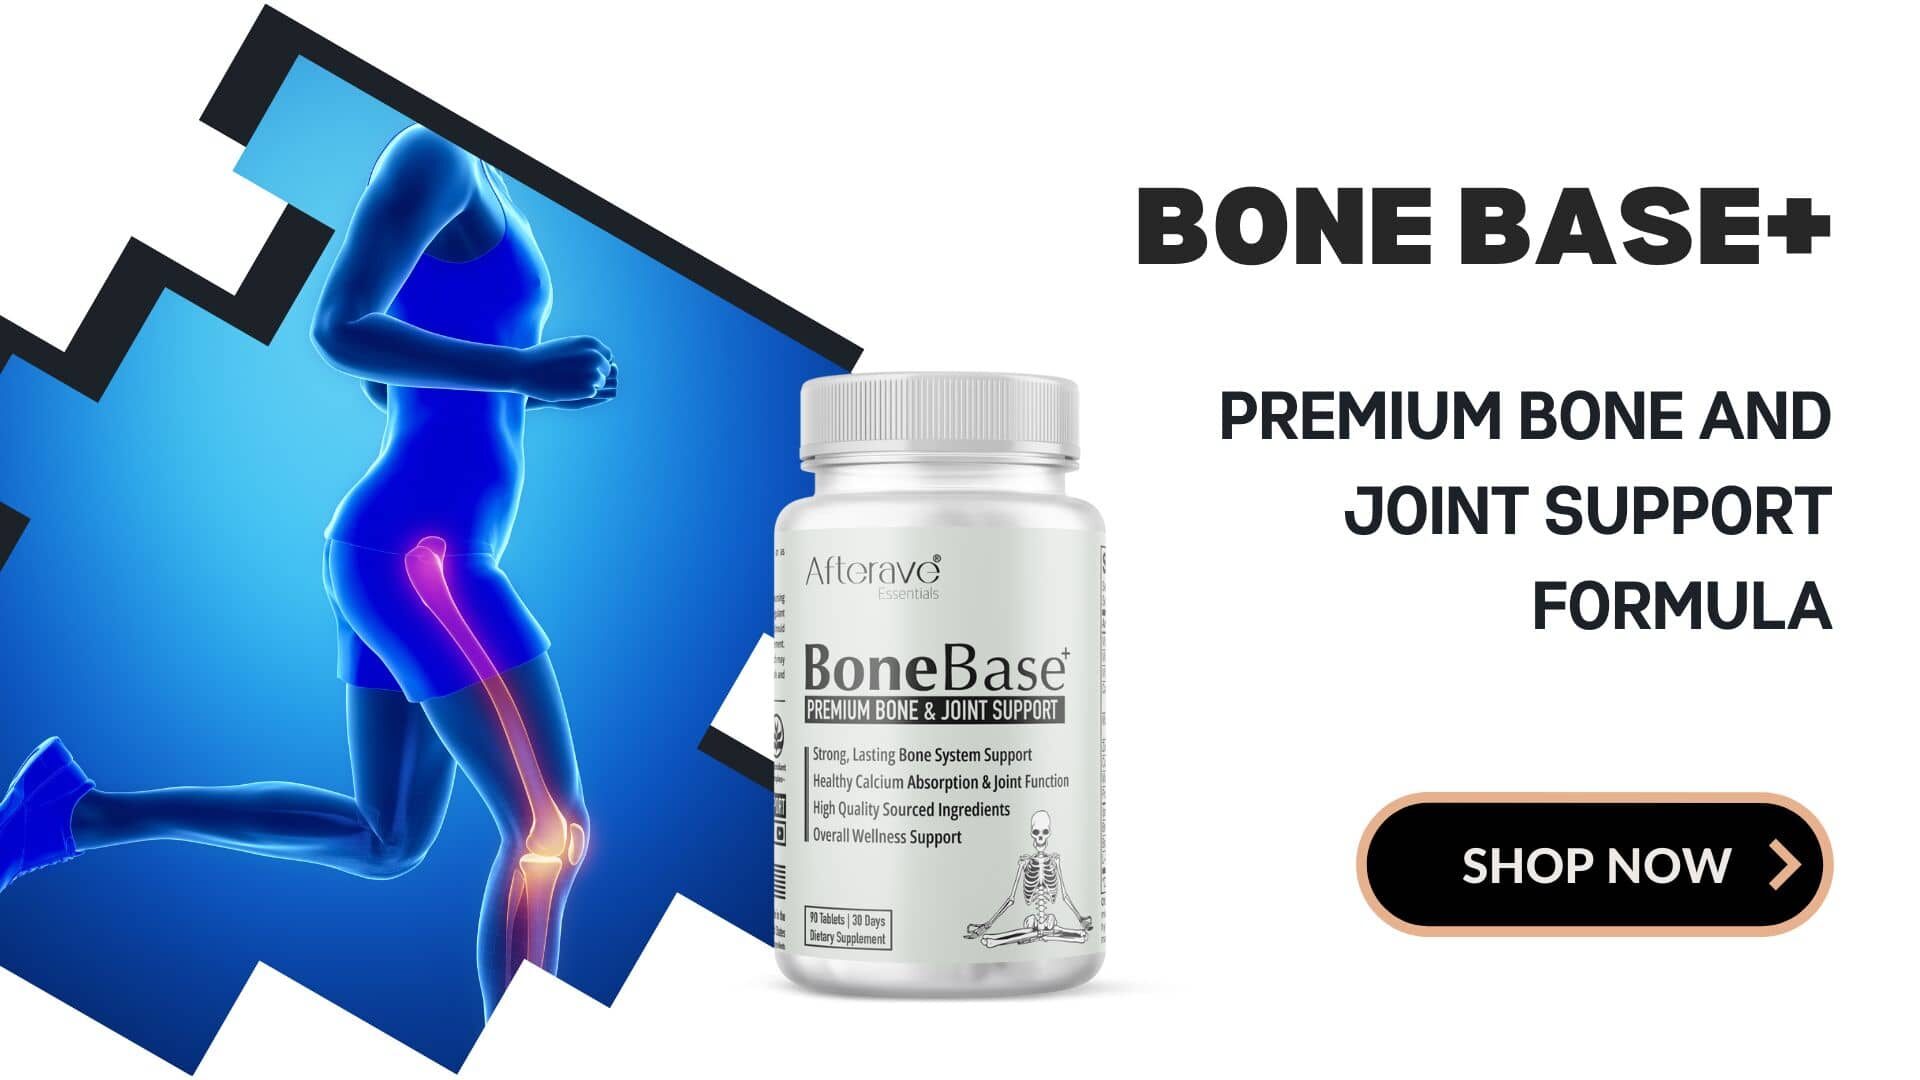 Premium Bone and Joint Support Formula21